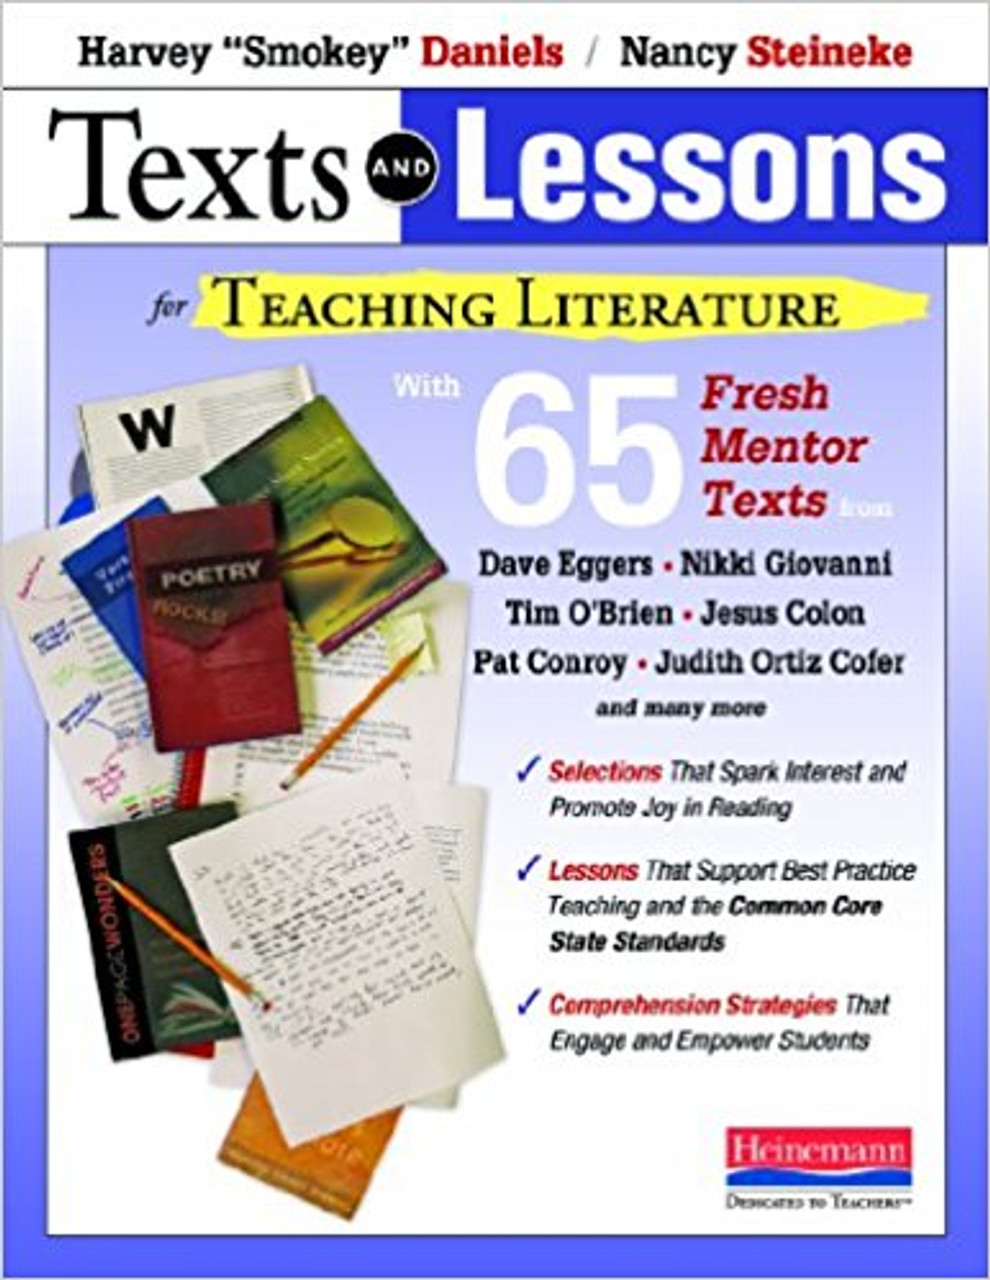 Texts and Lessons for Teaching Literature: With 65 Fresh Mentor Texts from Dave Eggers, Nikki Giovvanni, Pat Conroy, Jesus Colon, Tim O'Brien, Judith Ortiz Cofer, and Many More by Harvey Daniels